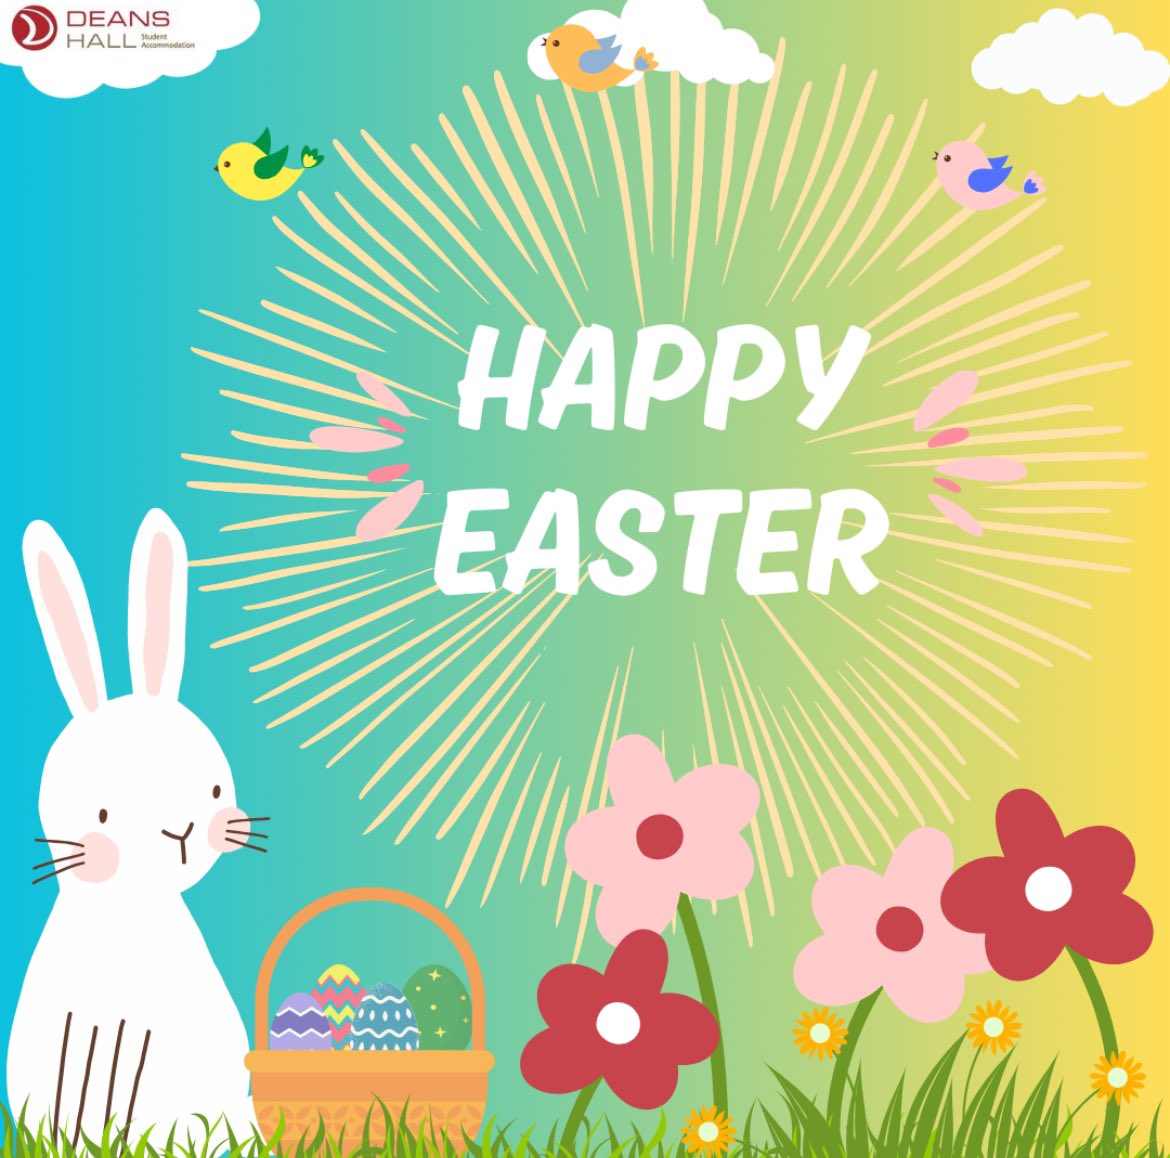 Happy Easter everyone! Have an eggcellent day 😊
 
#deanshall #easter #studentaccommodation #ucc #mtu #cork